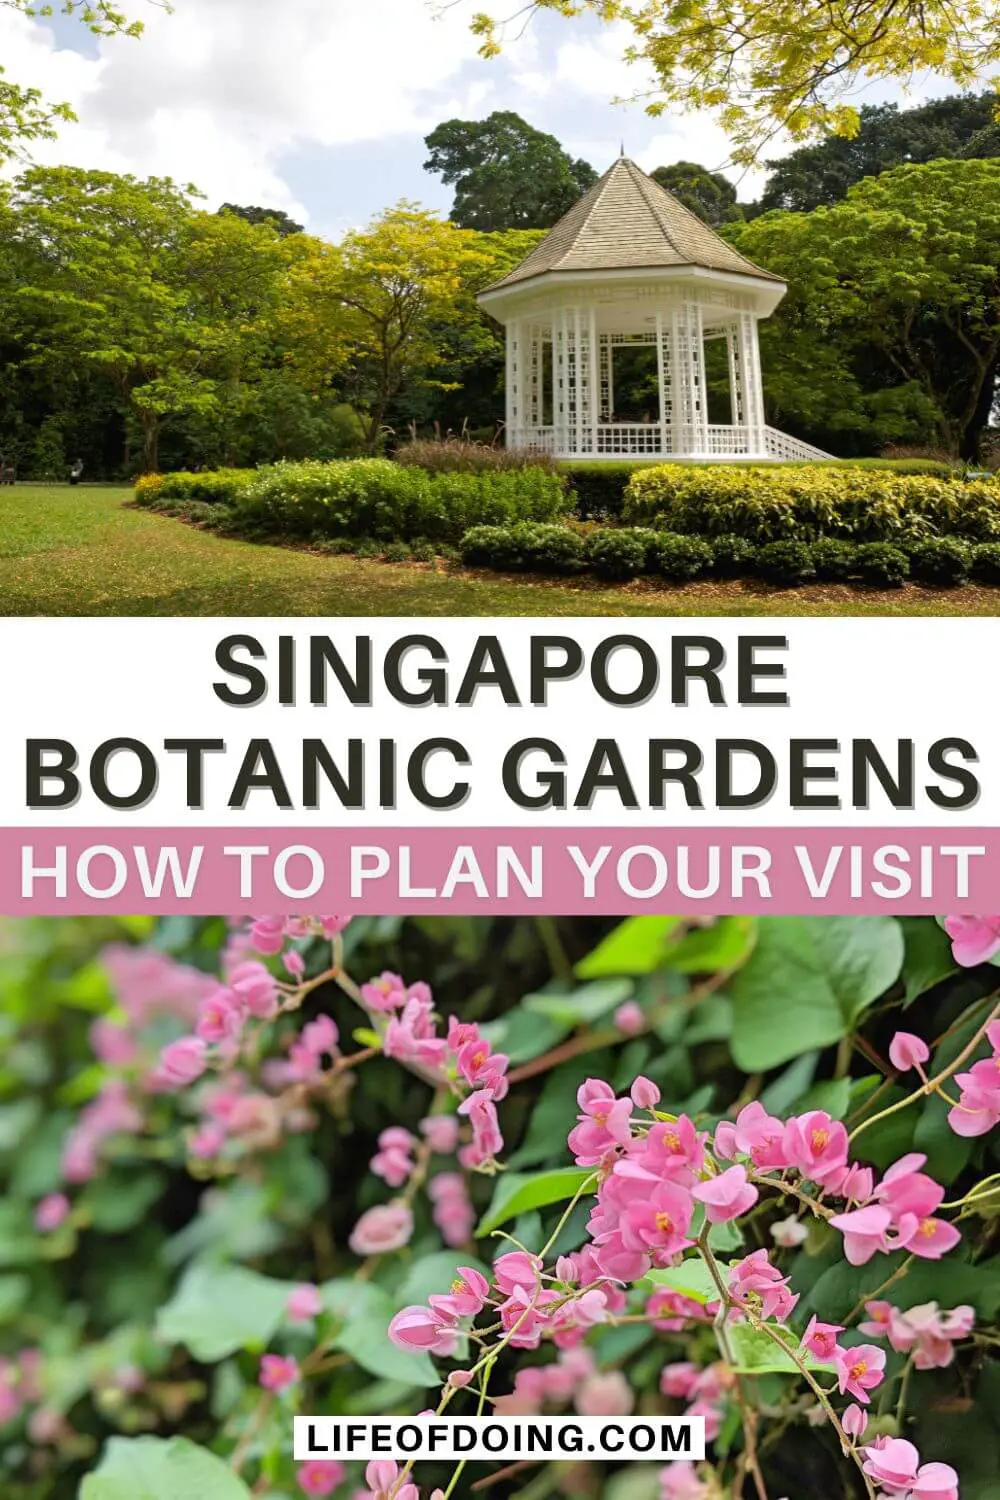 Top photo of a white gazebo called the Bandstand at Singapore Botanic Gardens and the bottom photo of pink flowers